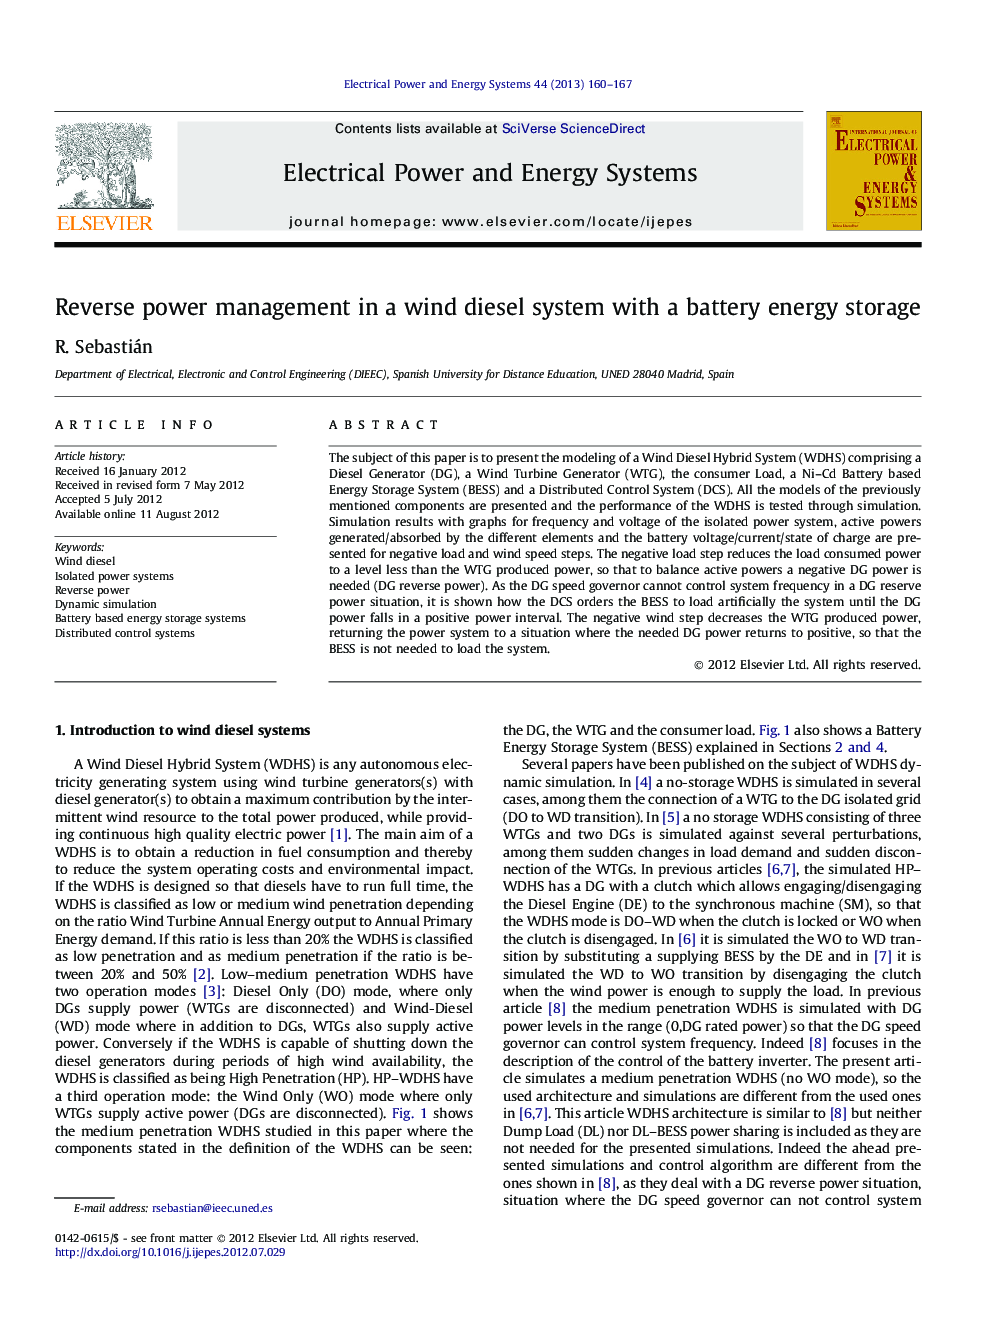 Reverse power management in a wind diesel system with a battery energy storage